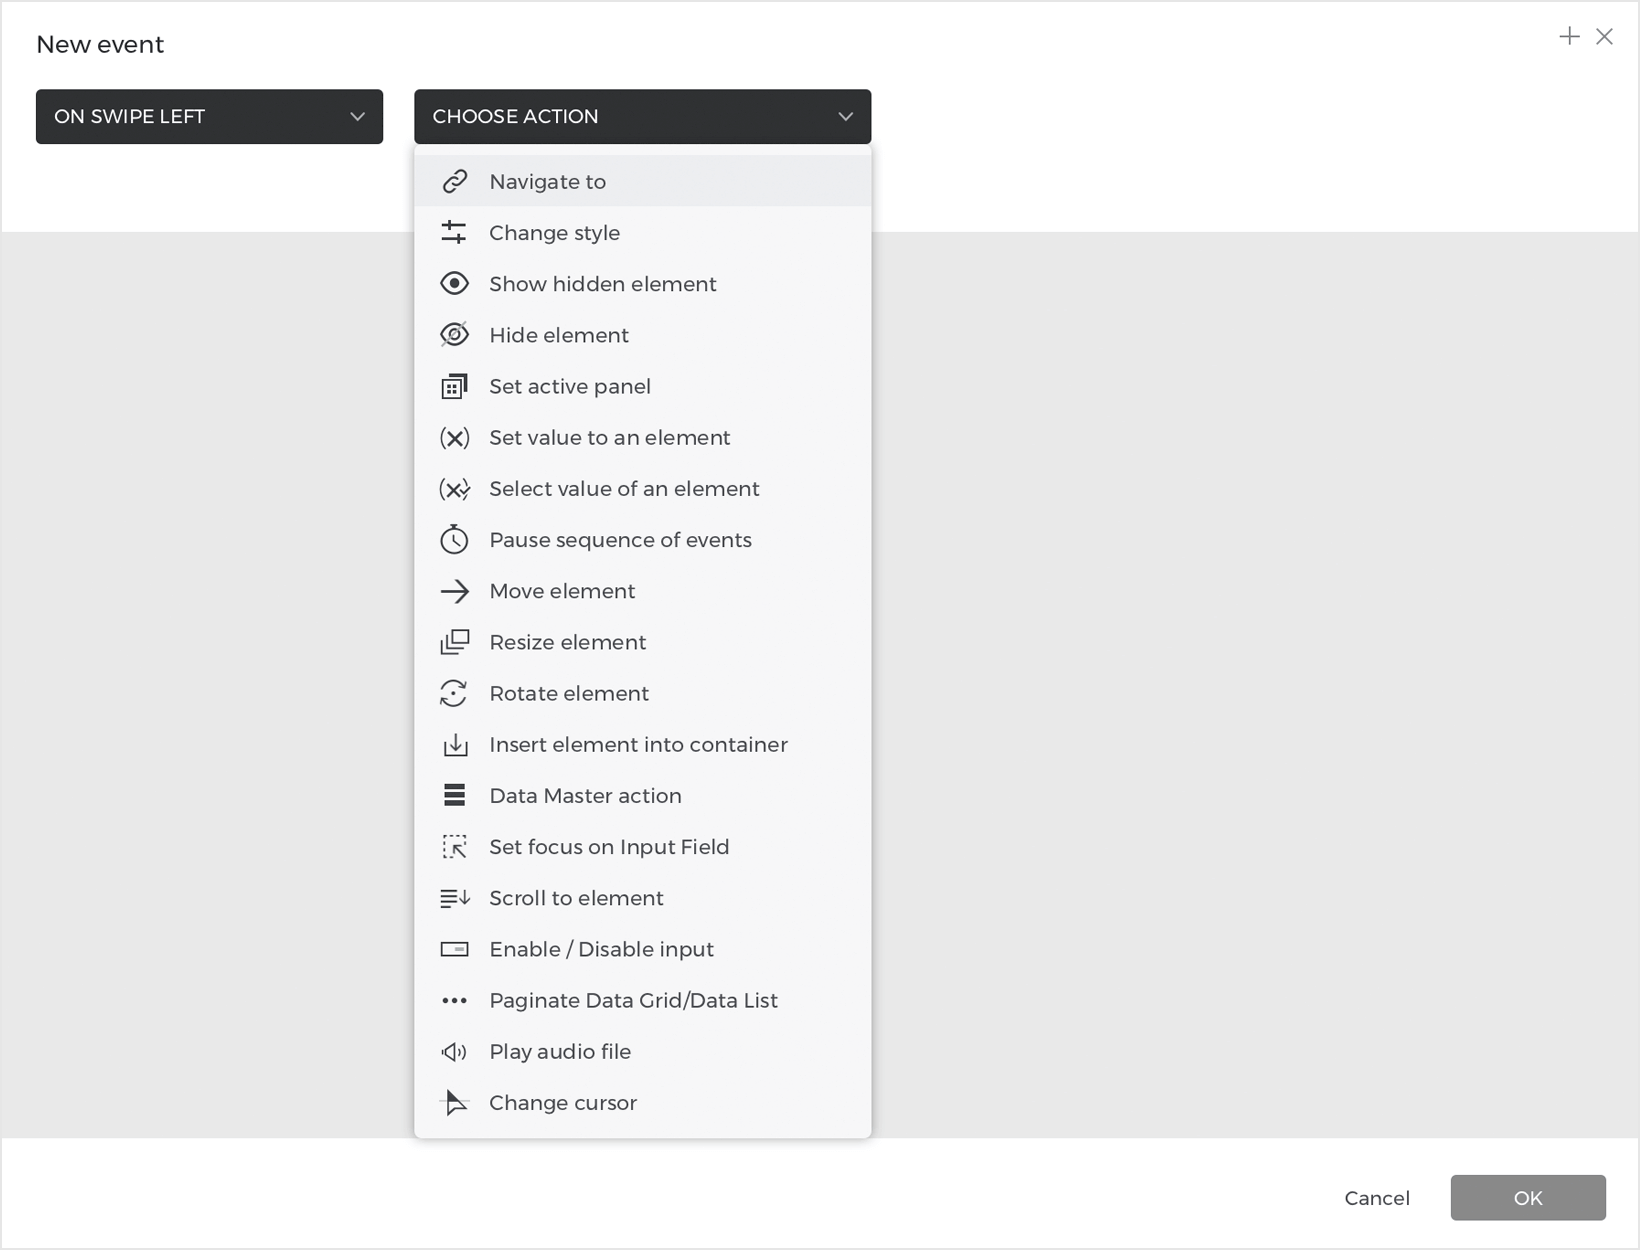 Choose a navigate to action from the actions dropdown